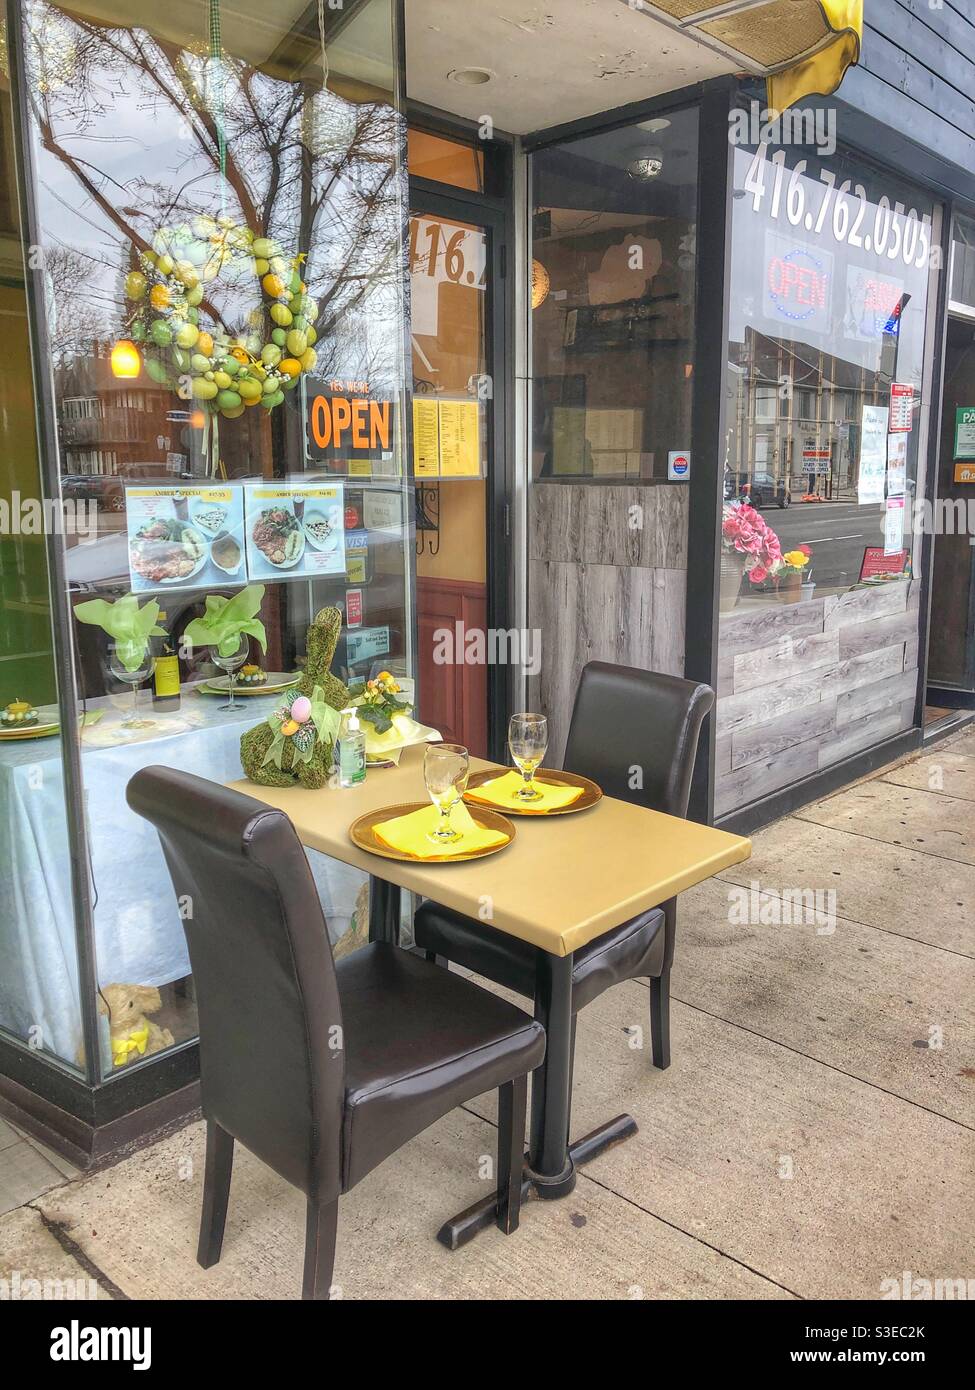 Outdoor seating during COVID-19. Stock Photo